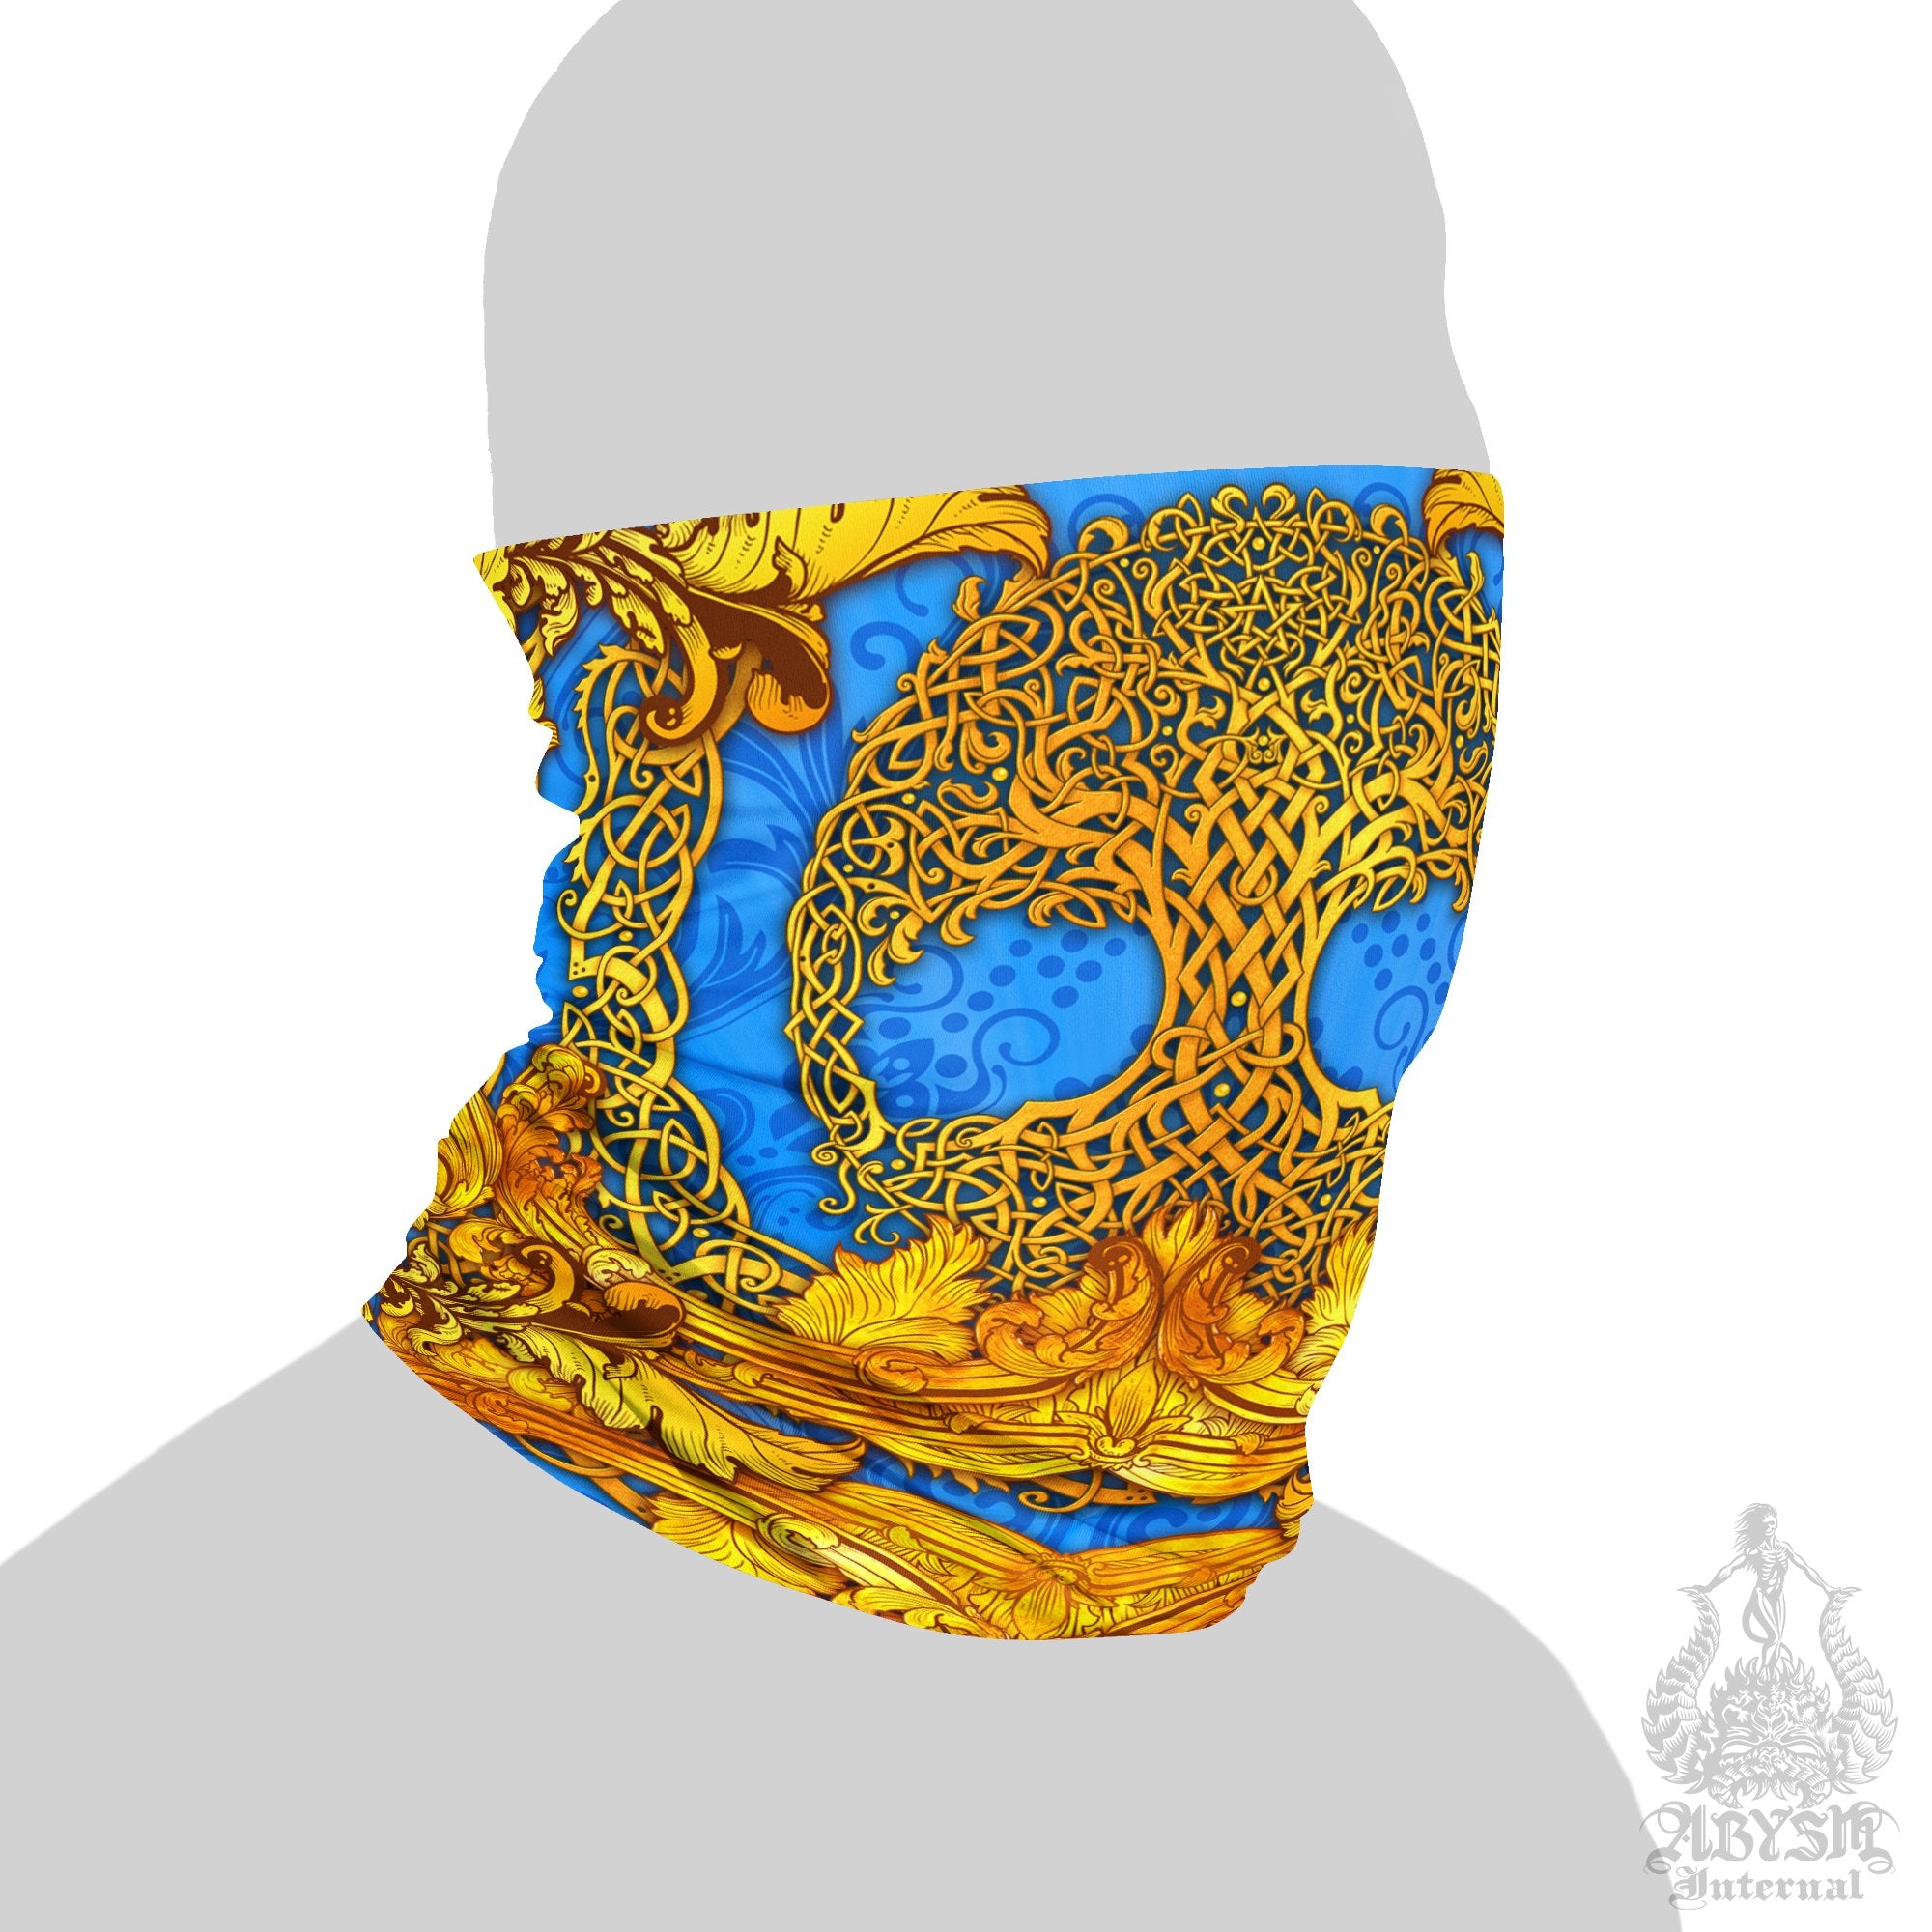 Colorful Tree of Life Neck Gaiter, Face Mask, Printed Head Covering, Rave Outfit, Celtic Pagan Outfit, Witchy - 7 Colors - Abysm Internal